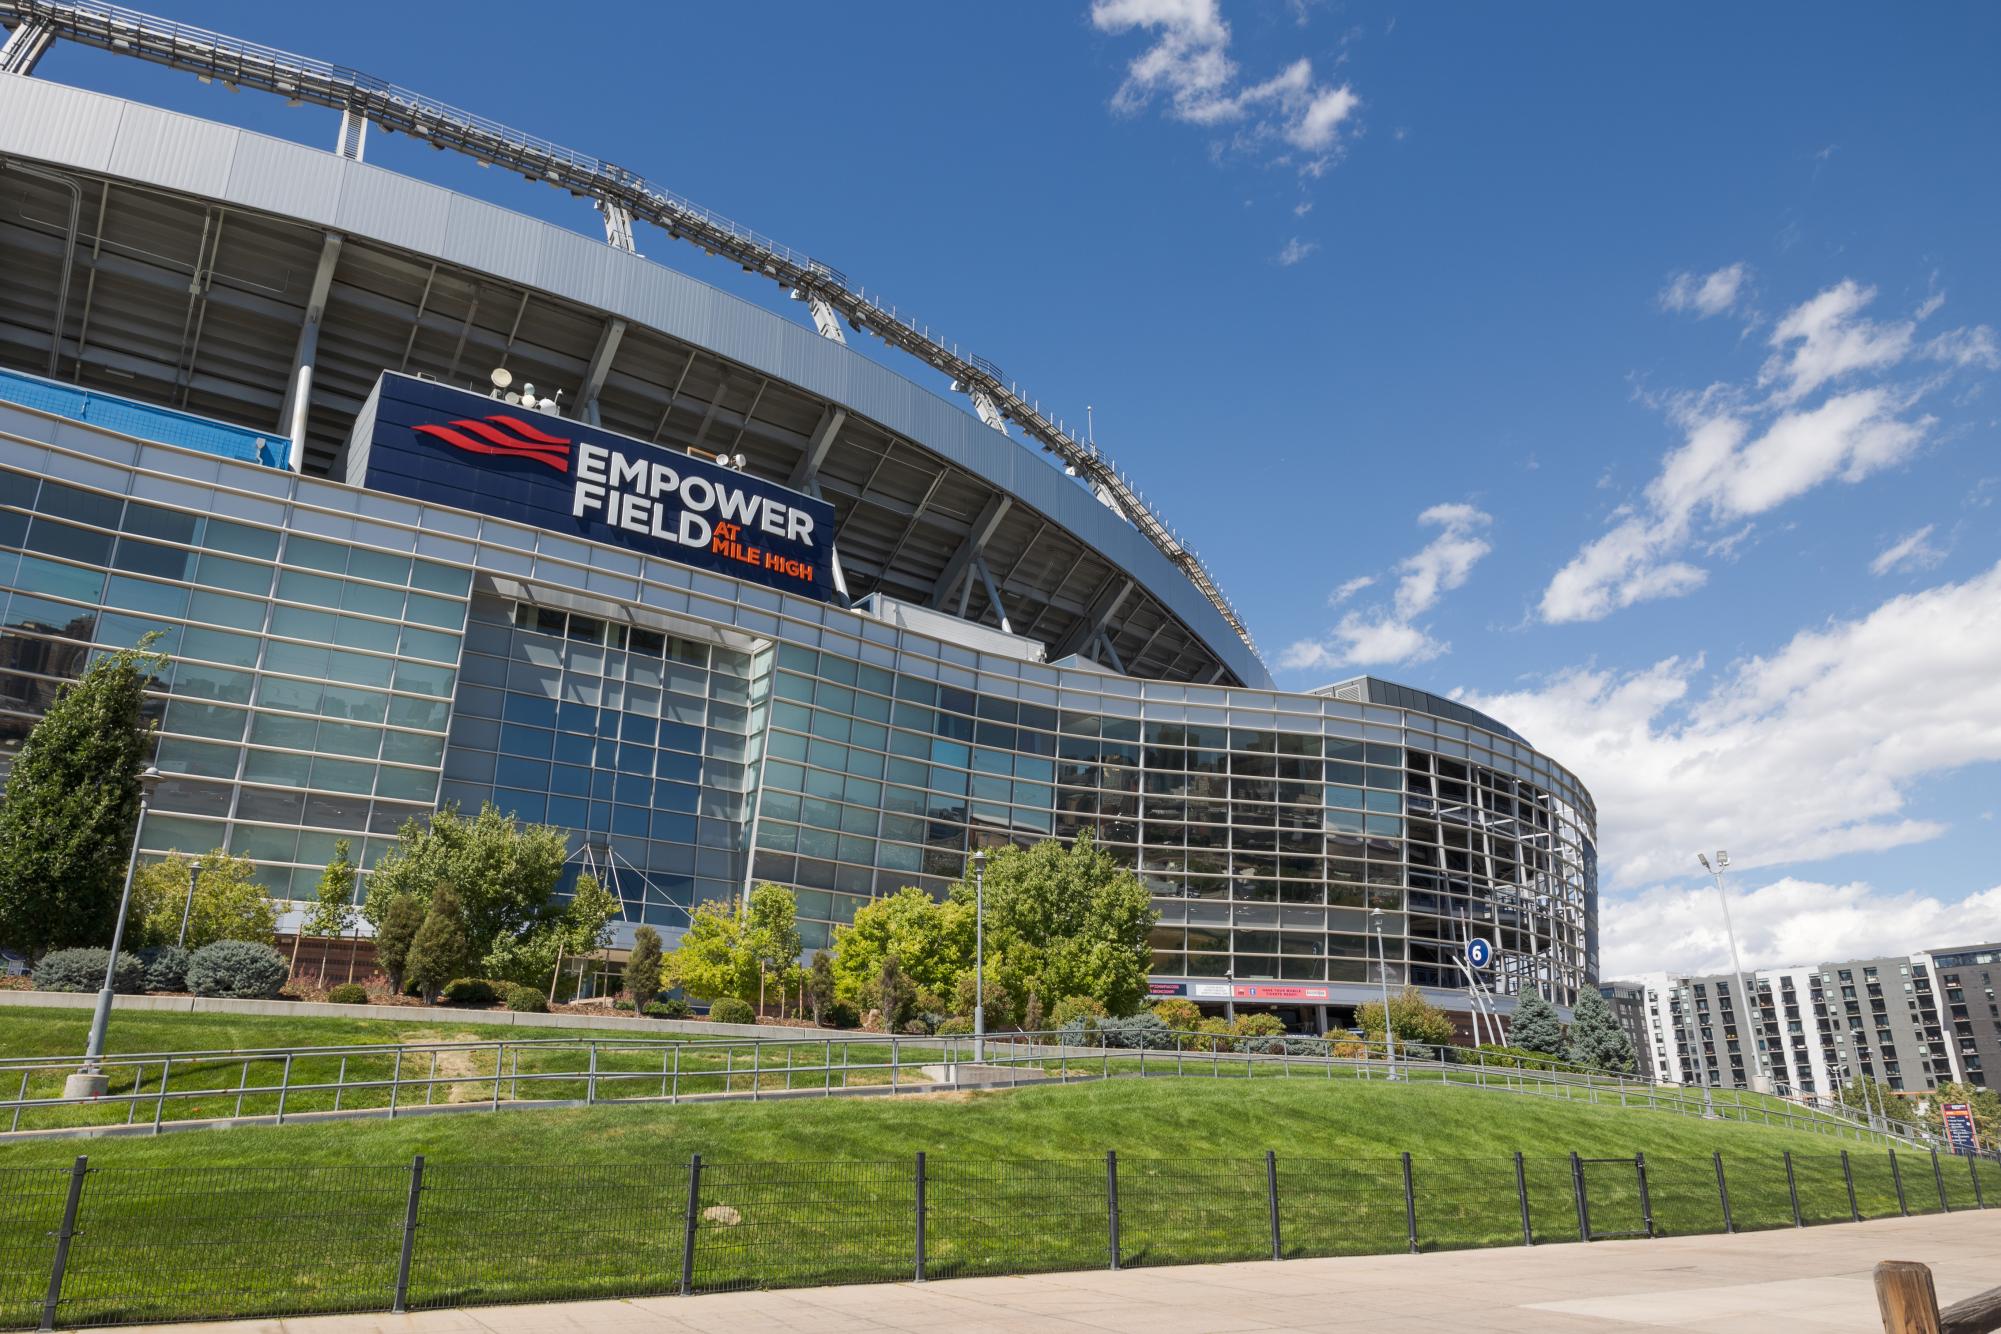 Showdown says goodbye to 2 decades of Mile High – The Rocky